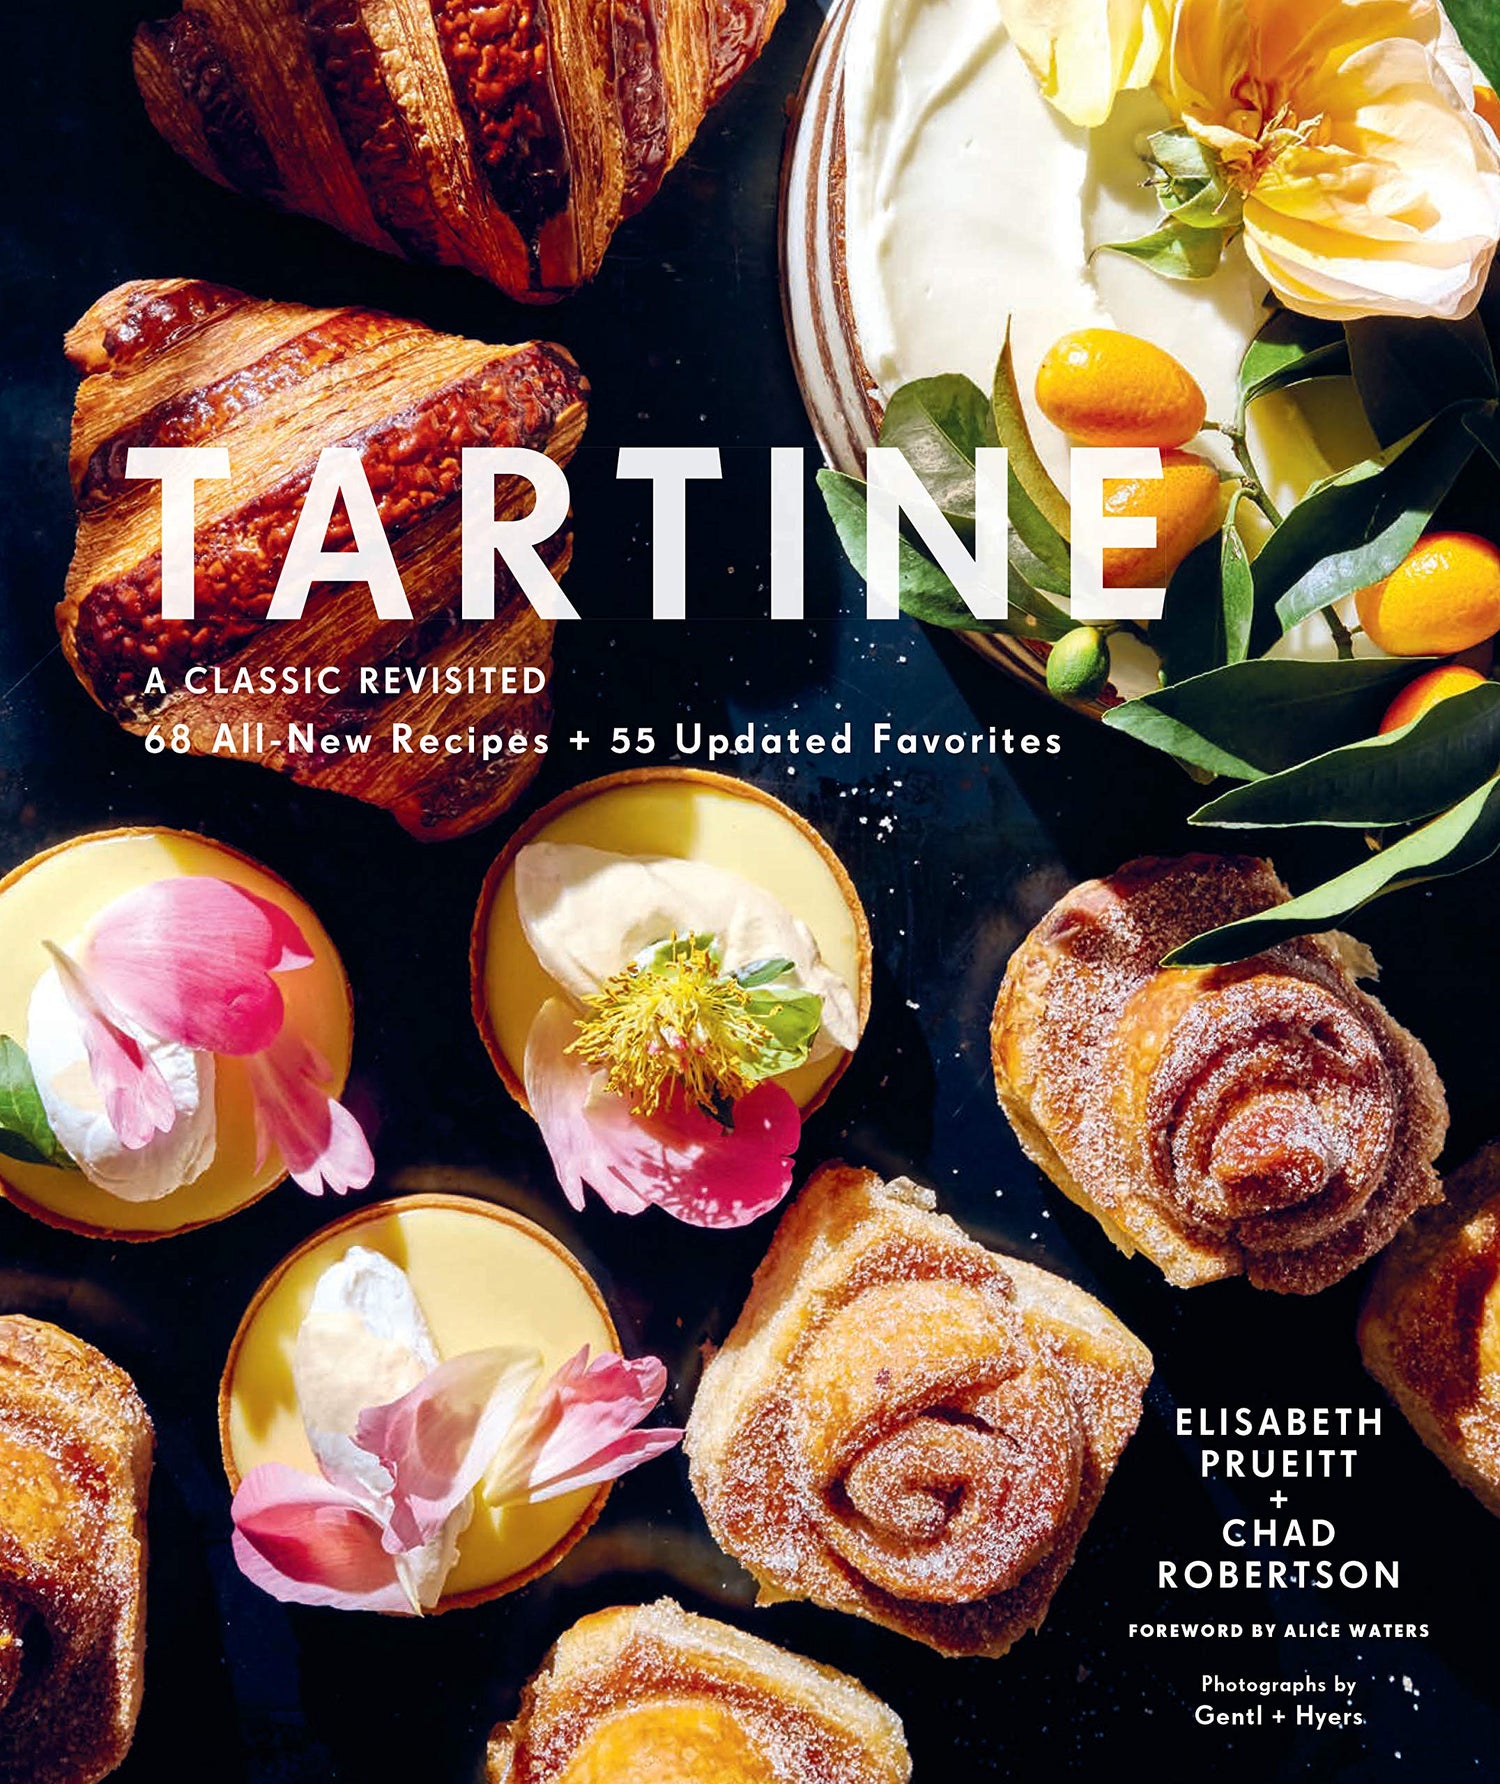 This brilliantly revisited and beautifully rephotographed book is a totally updated edition of a go-to classic for home and professional bakers—from one of the most acclaimed and inspiring bakeries in the world.